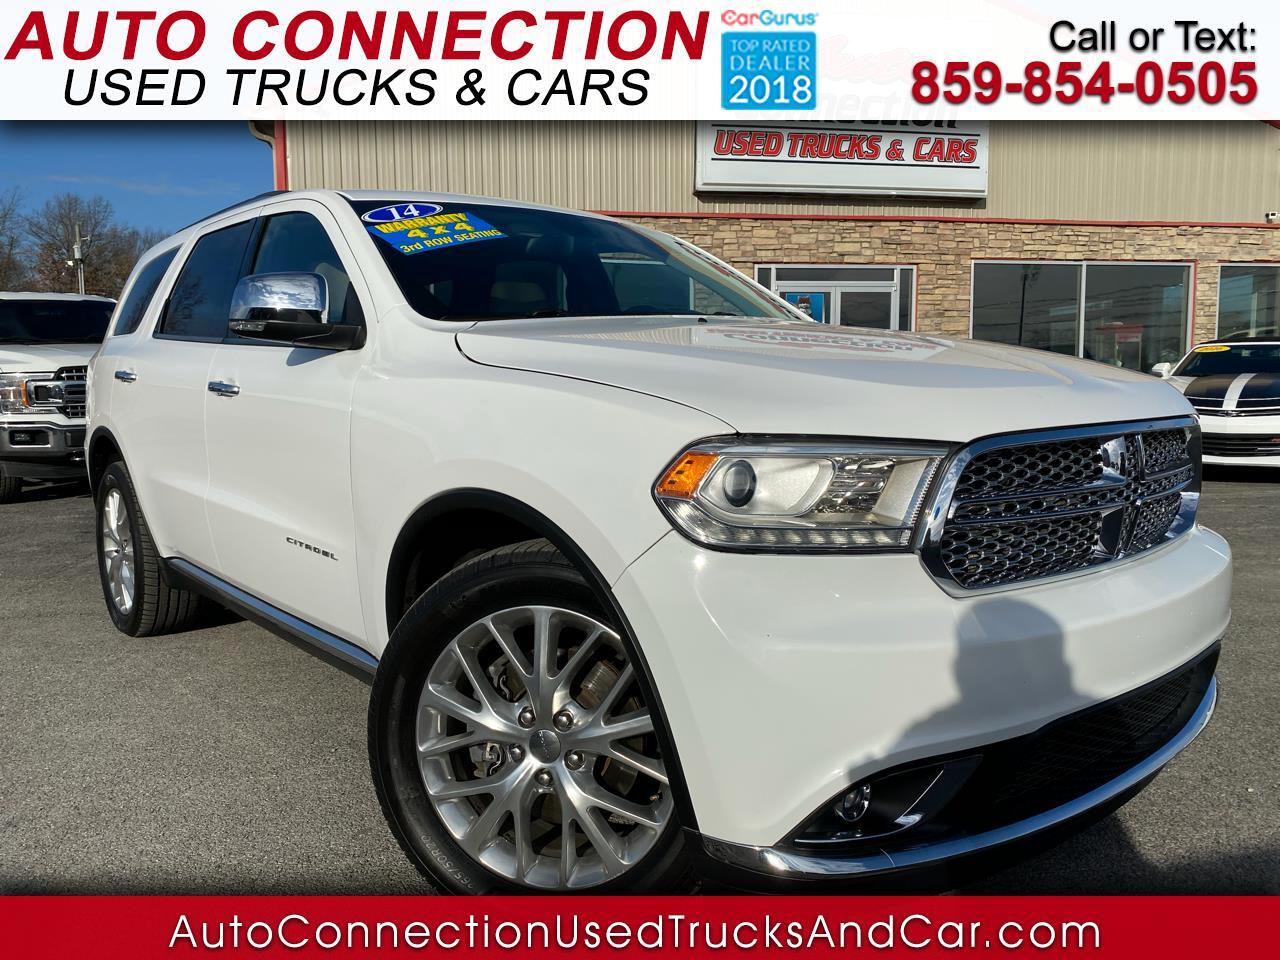 Used 2014 Dodge Durango Awd 4dr Citadel For Sale In Junction City